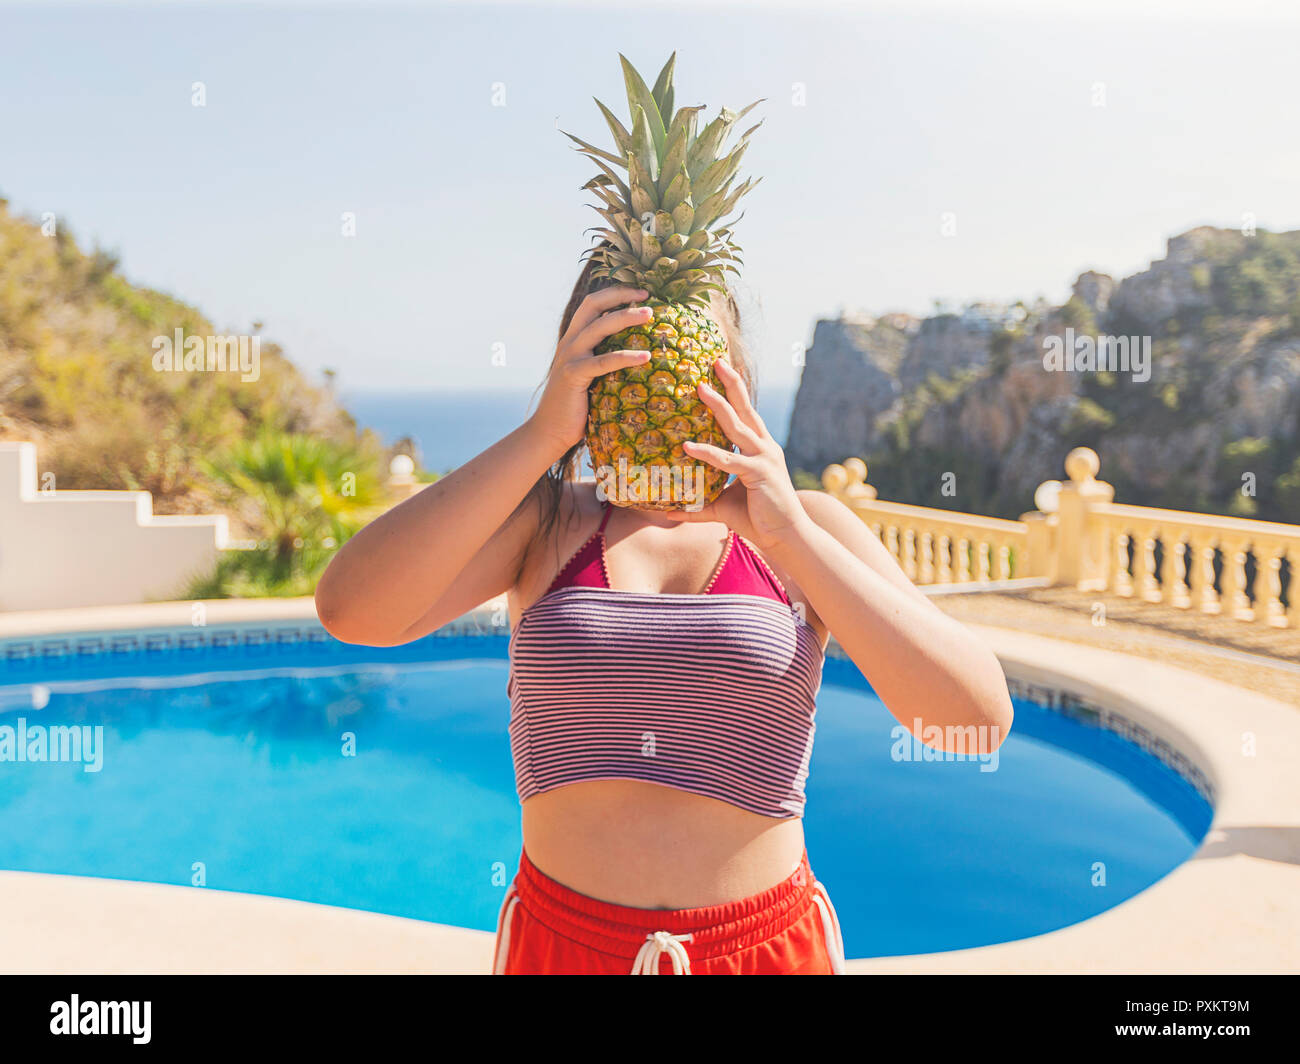 Girl with pineapple covering face Stock Photo